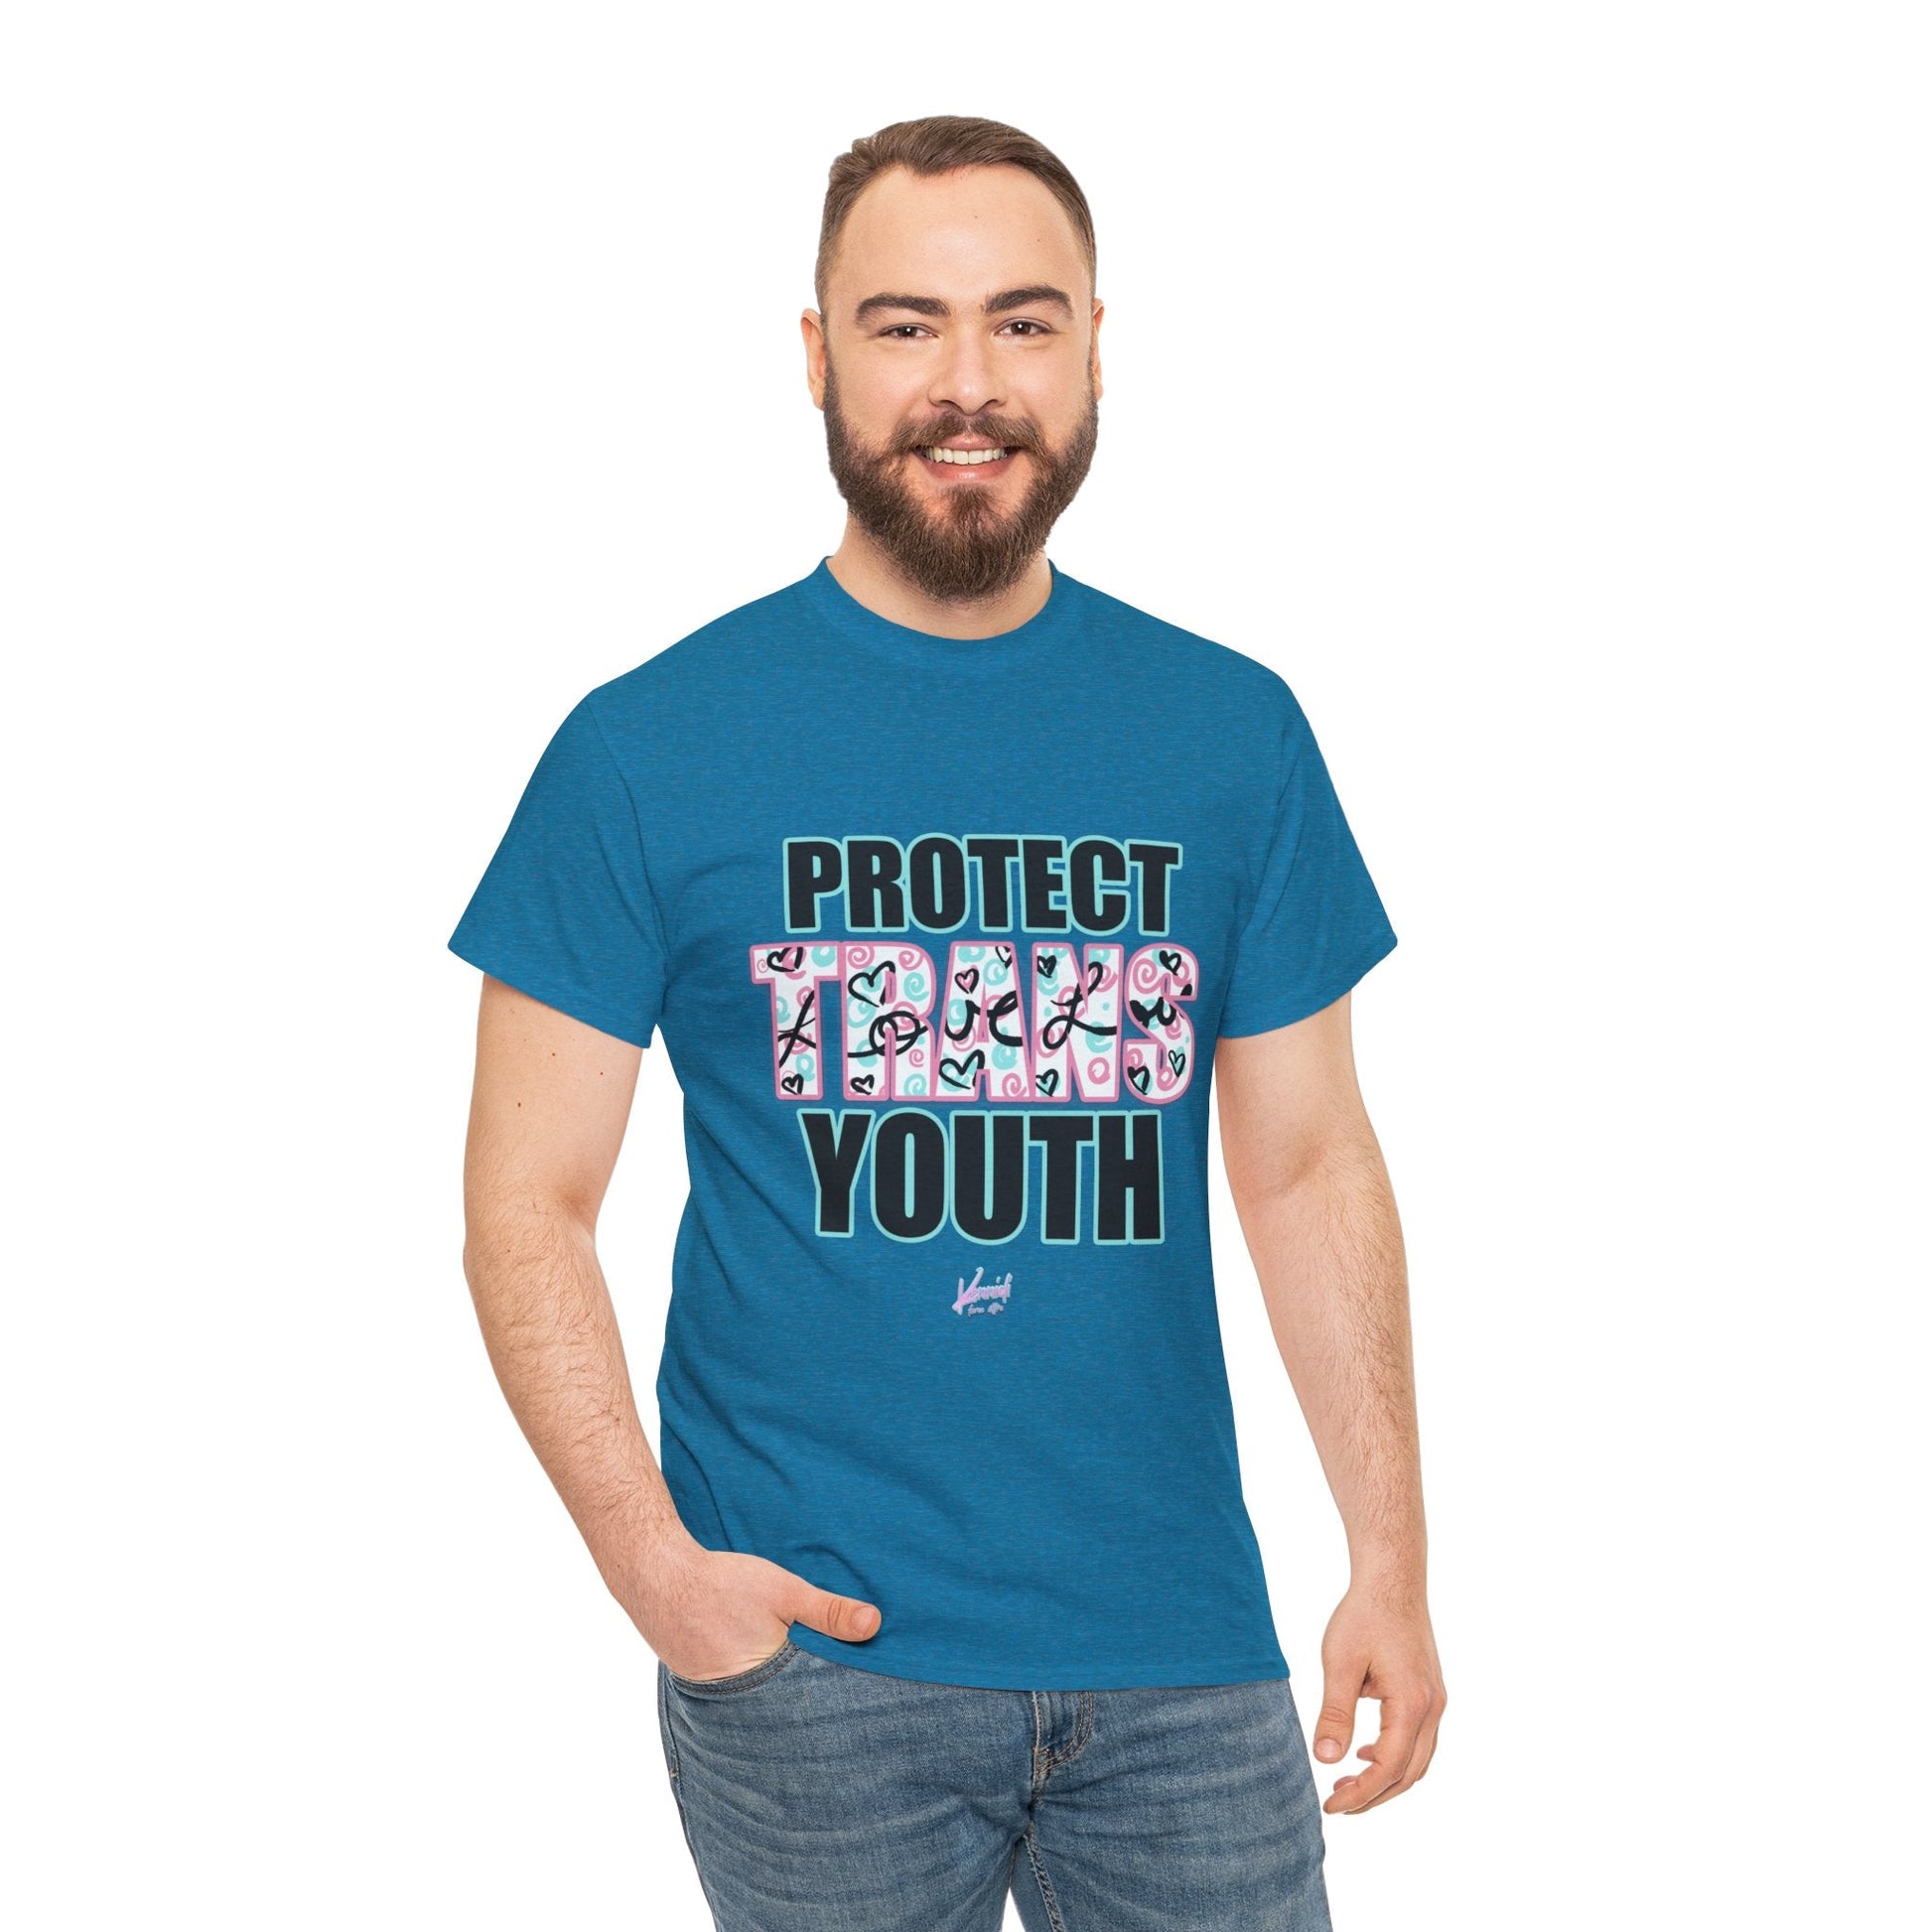 Protect Trans Youth Love 3.0 Unisex Heavy Cotton Tee - Antique Sapphire / S T - Shirt